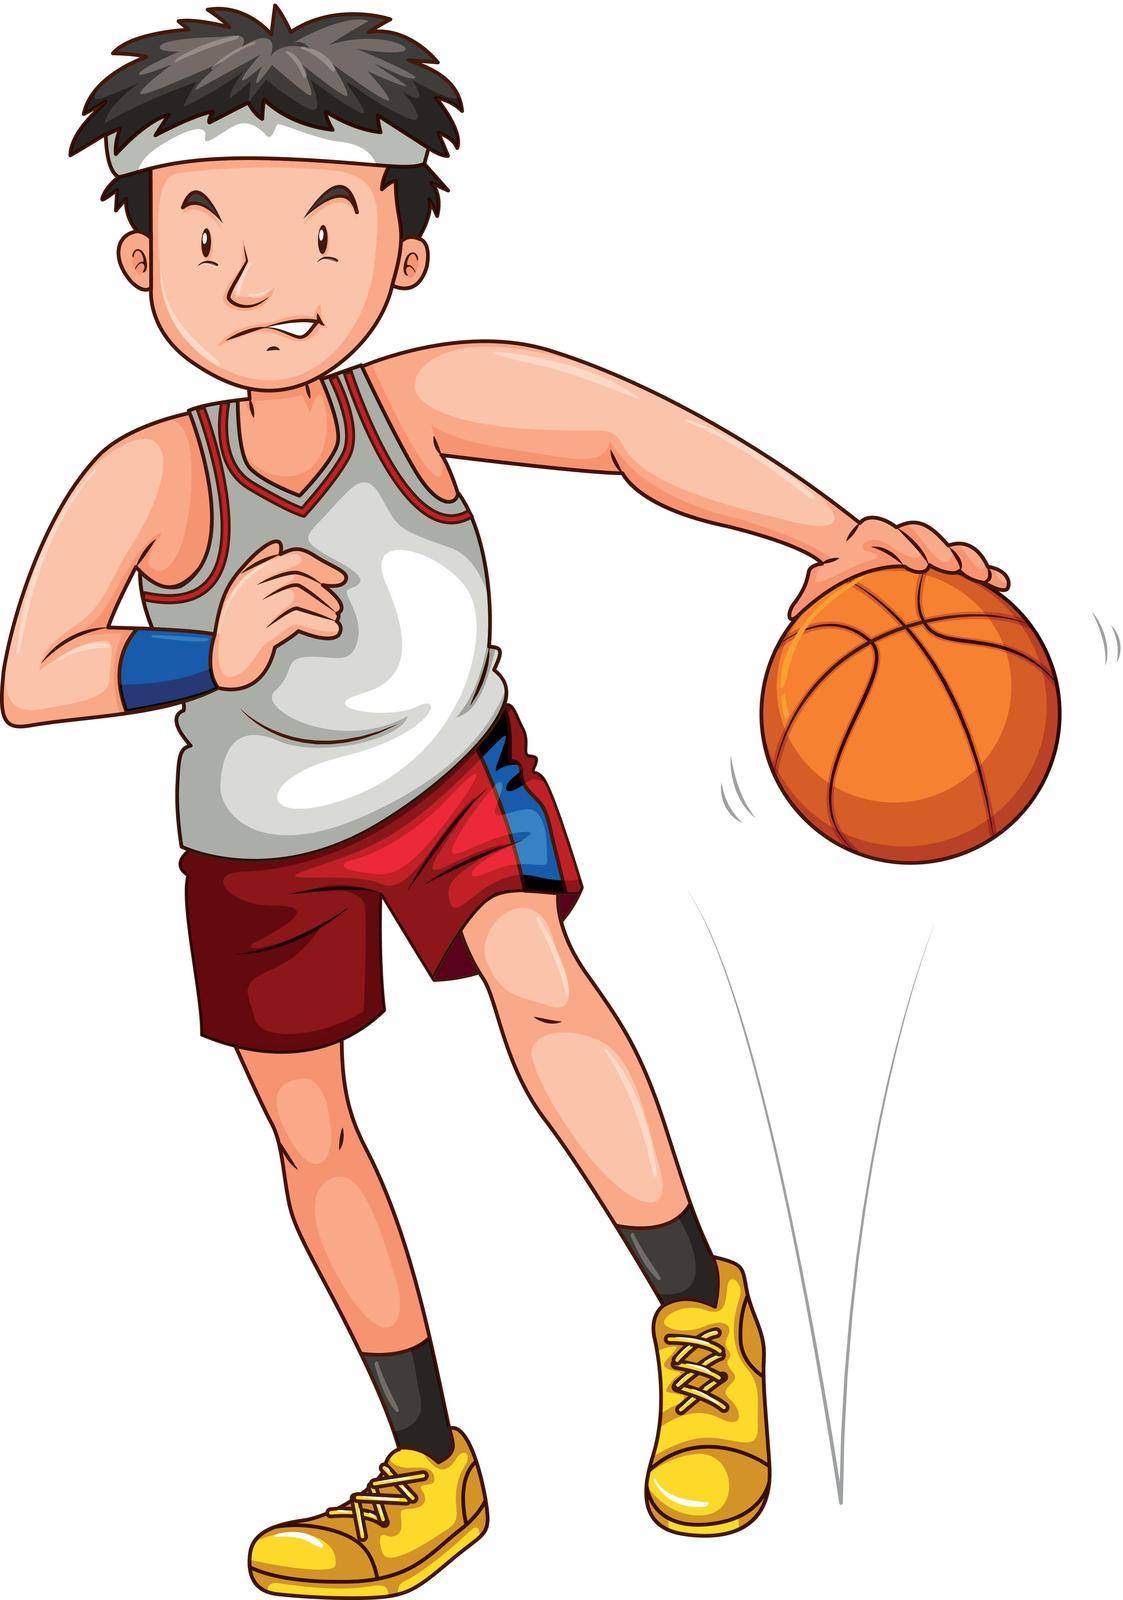 Man playing basketball alone by iimages